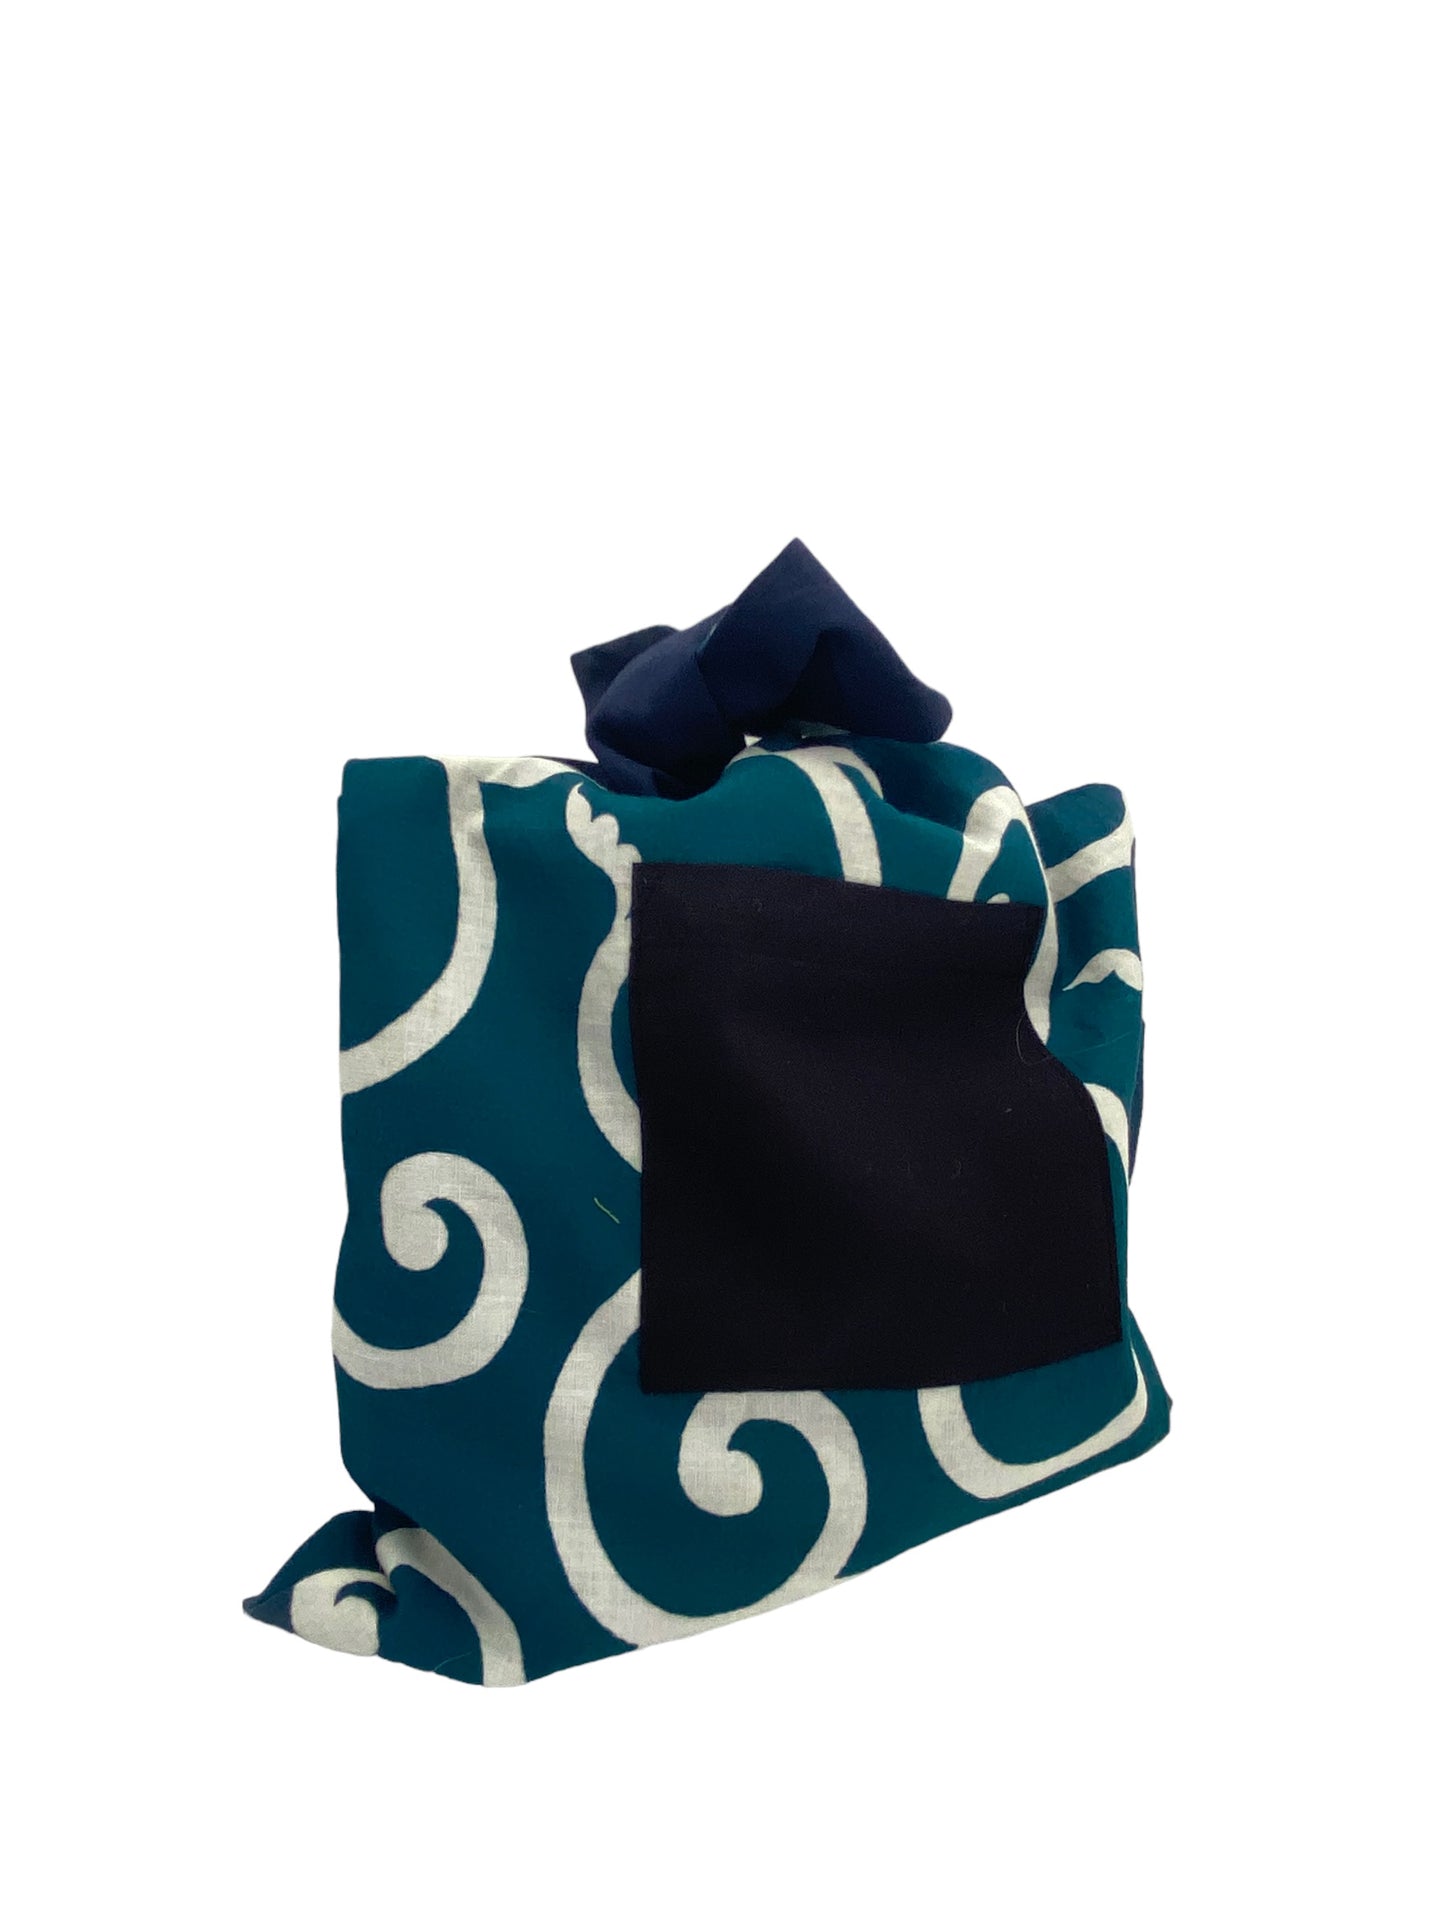 An idea bag that can also be used as a handbag by tying the top part using furoshiki cloth.